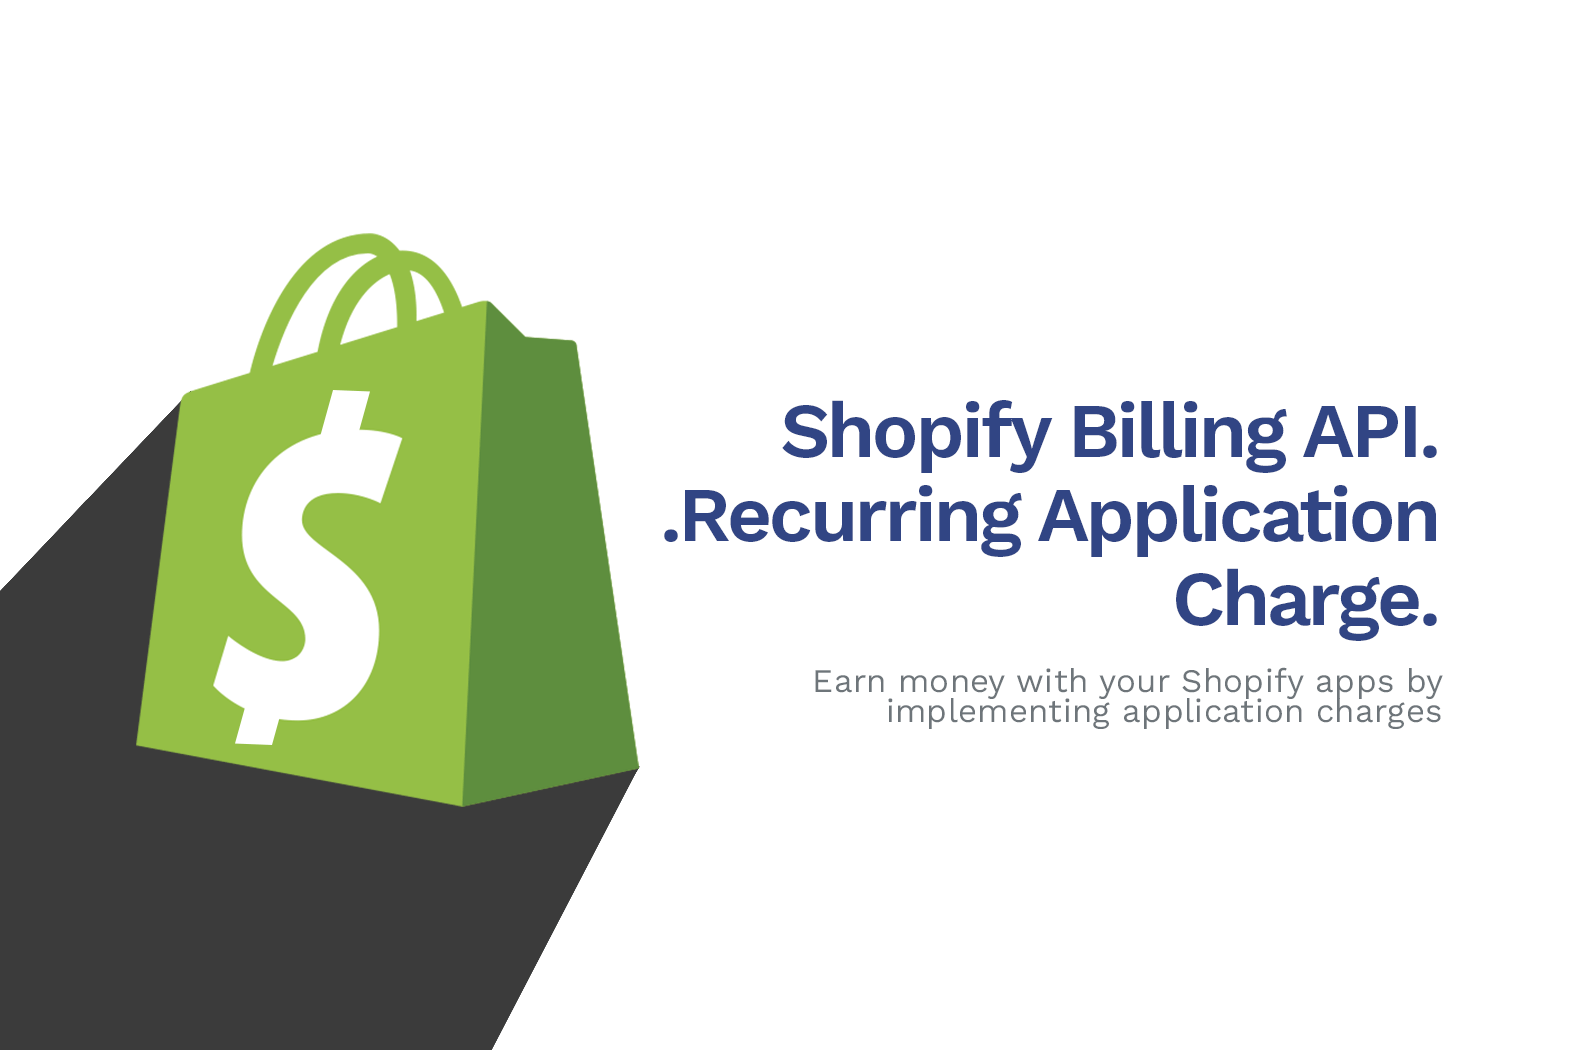 How-To-Implement-Recurring-Application-Charge-API-To-Shopify-Apps